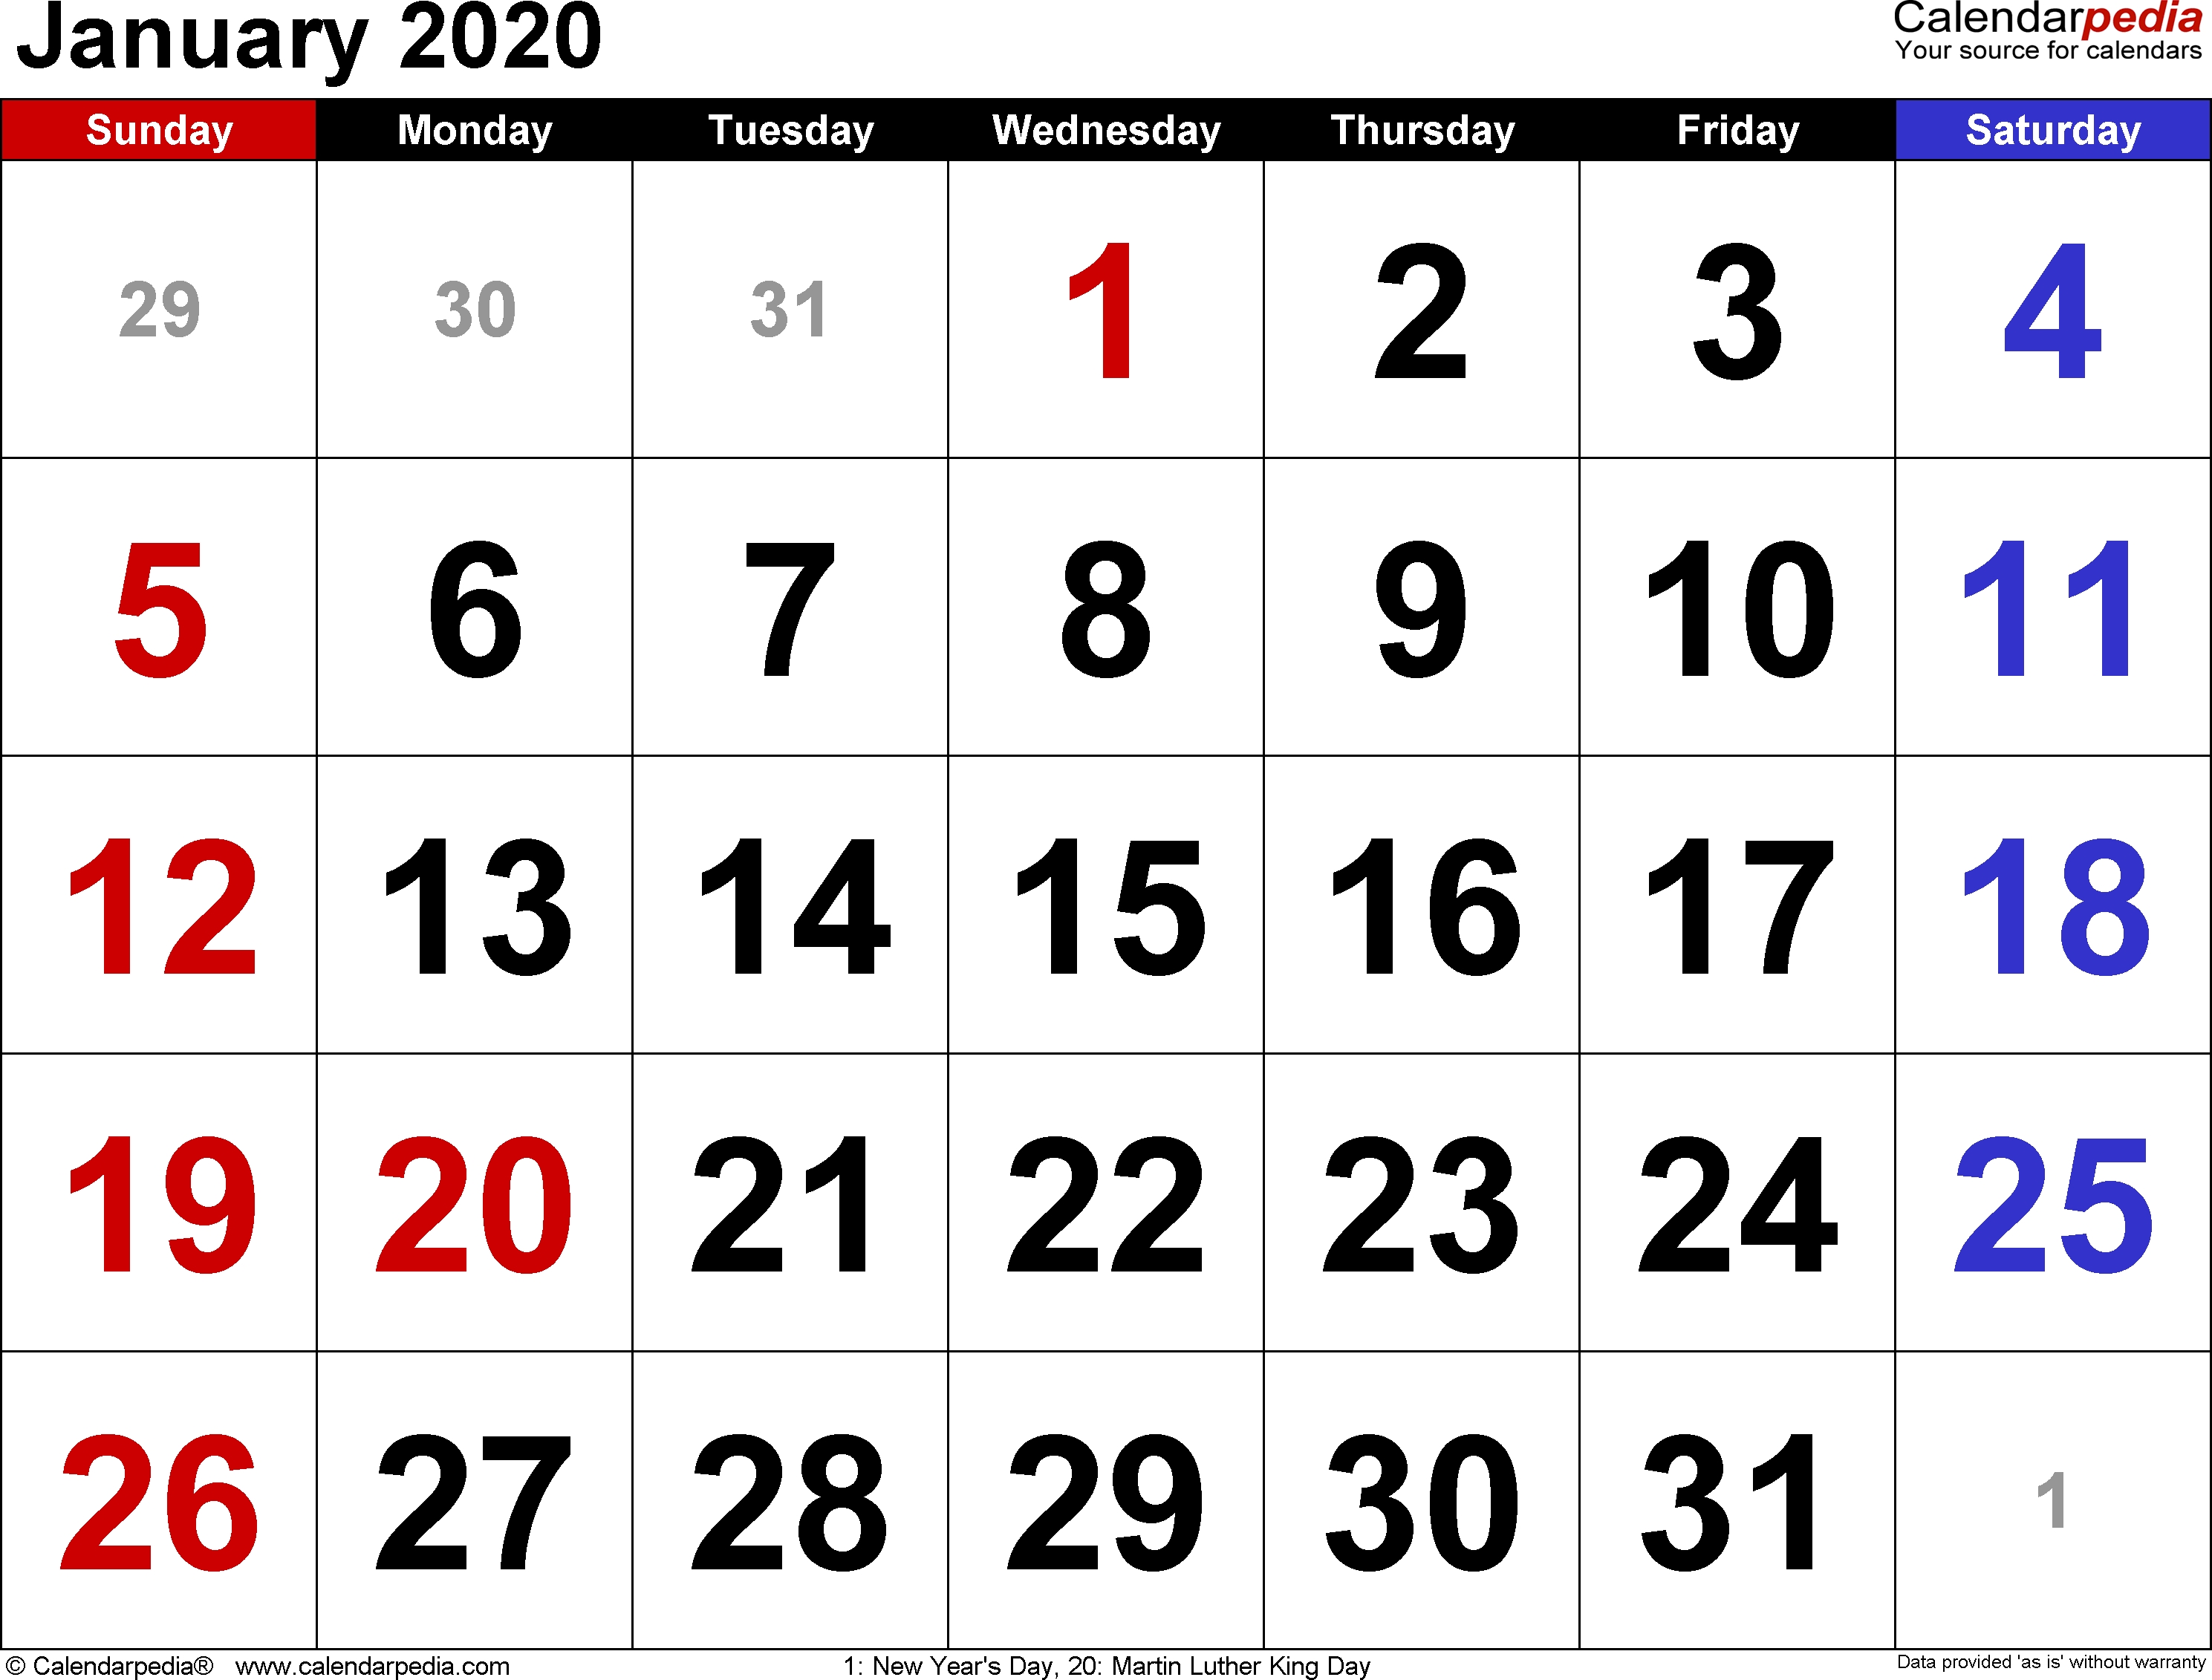 January 2020 Calendars For Word, Excel &amp; Pdf-January 2020 Calendar Download